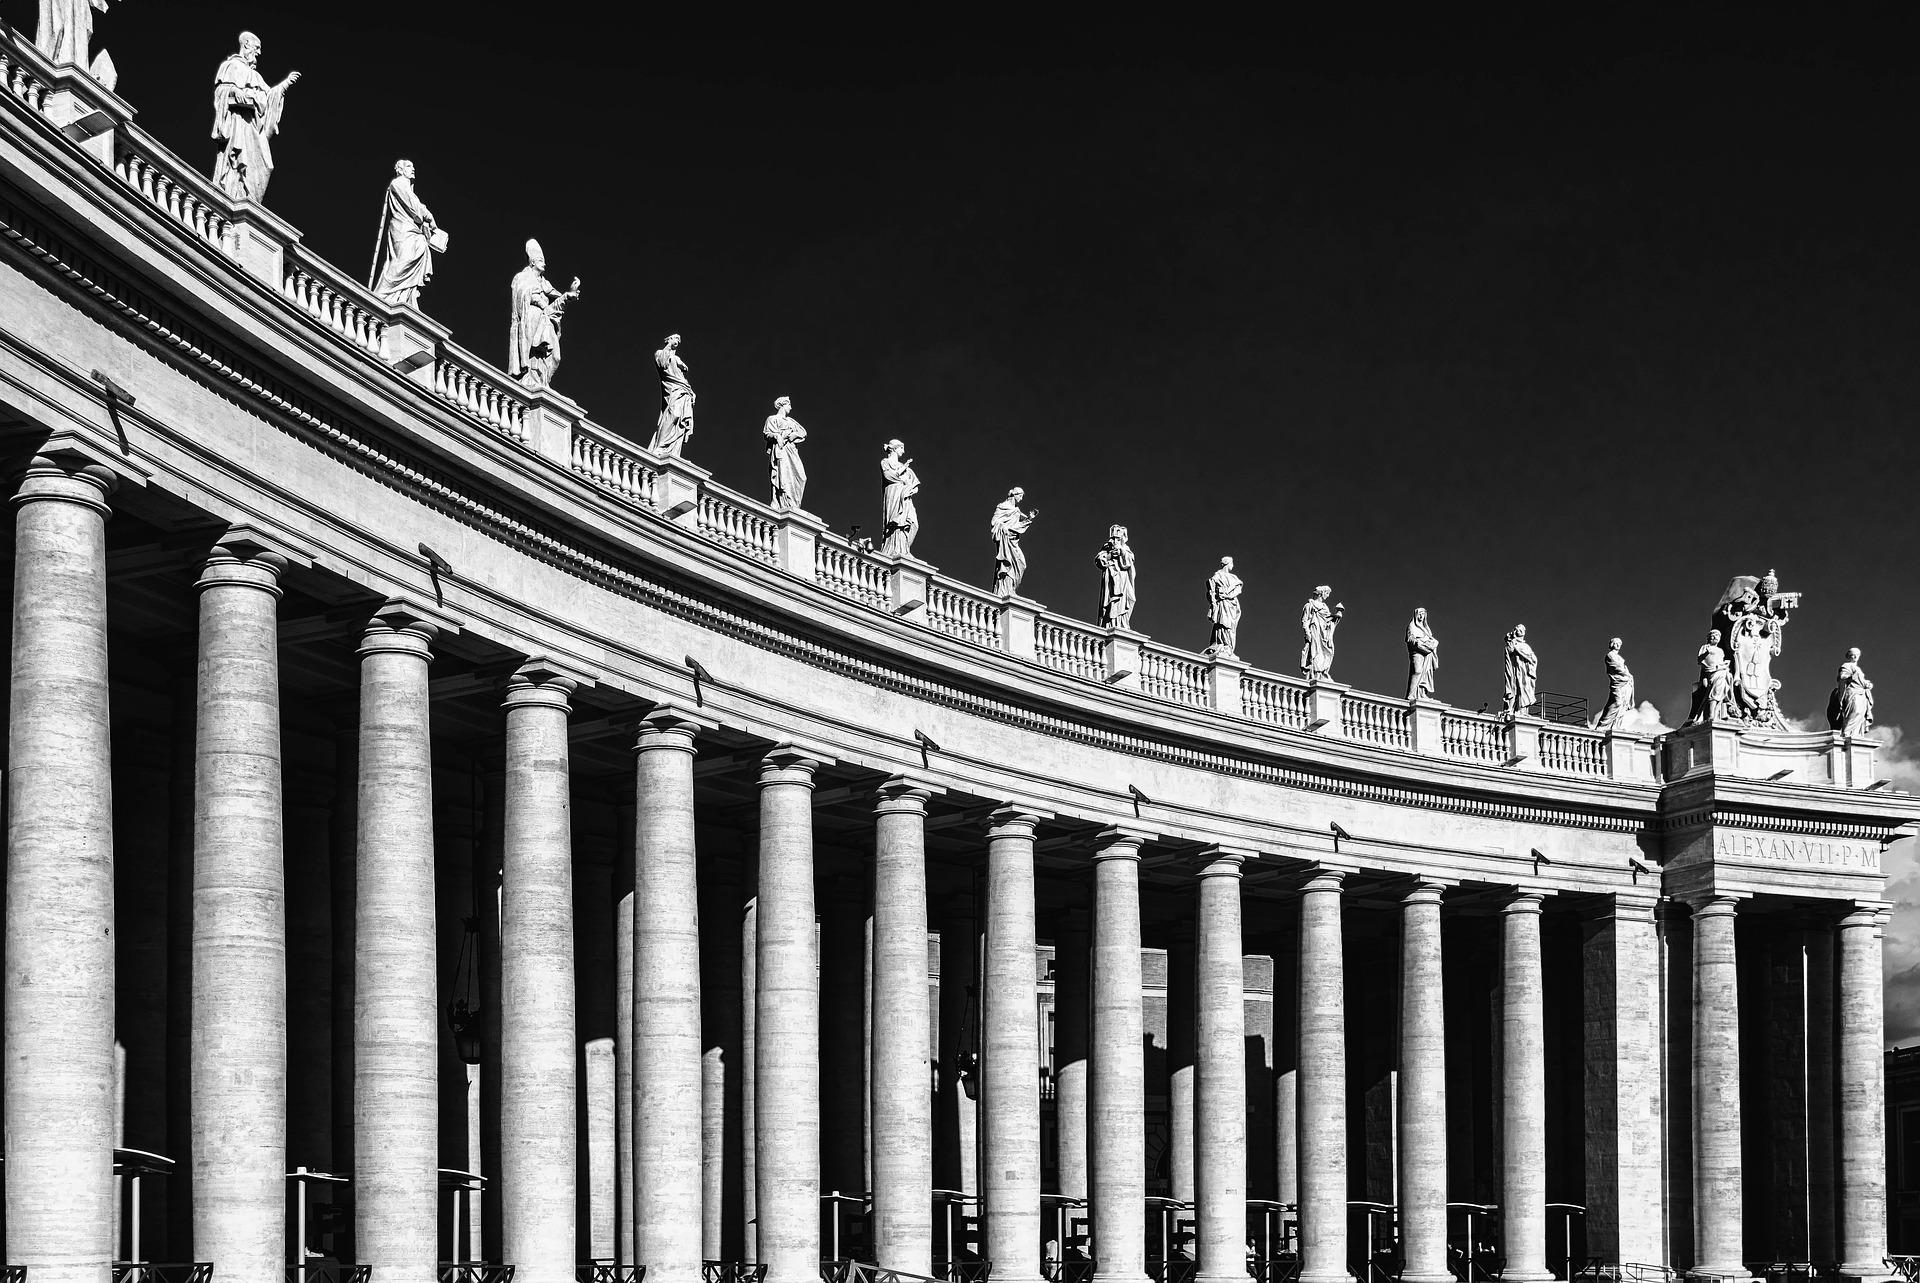 San Pietro Square | Requirements for Residency in Italy